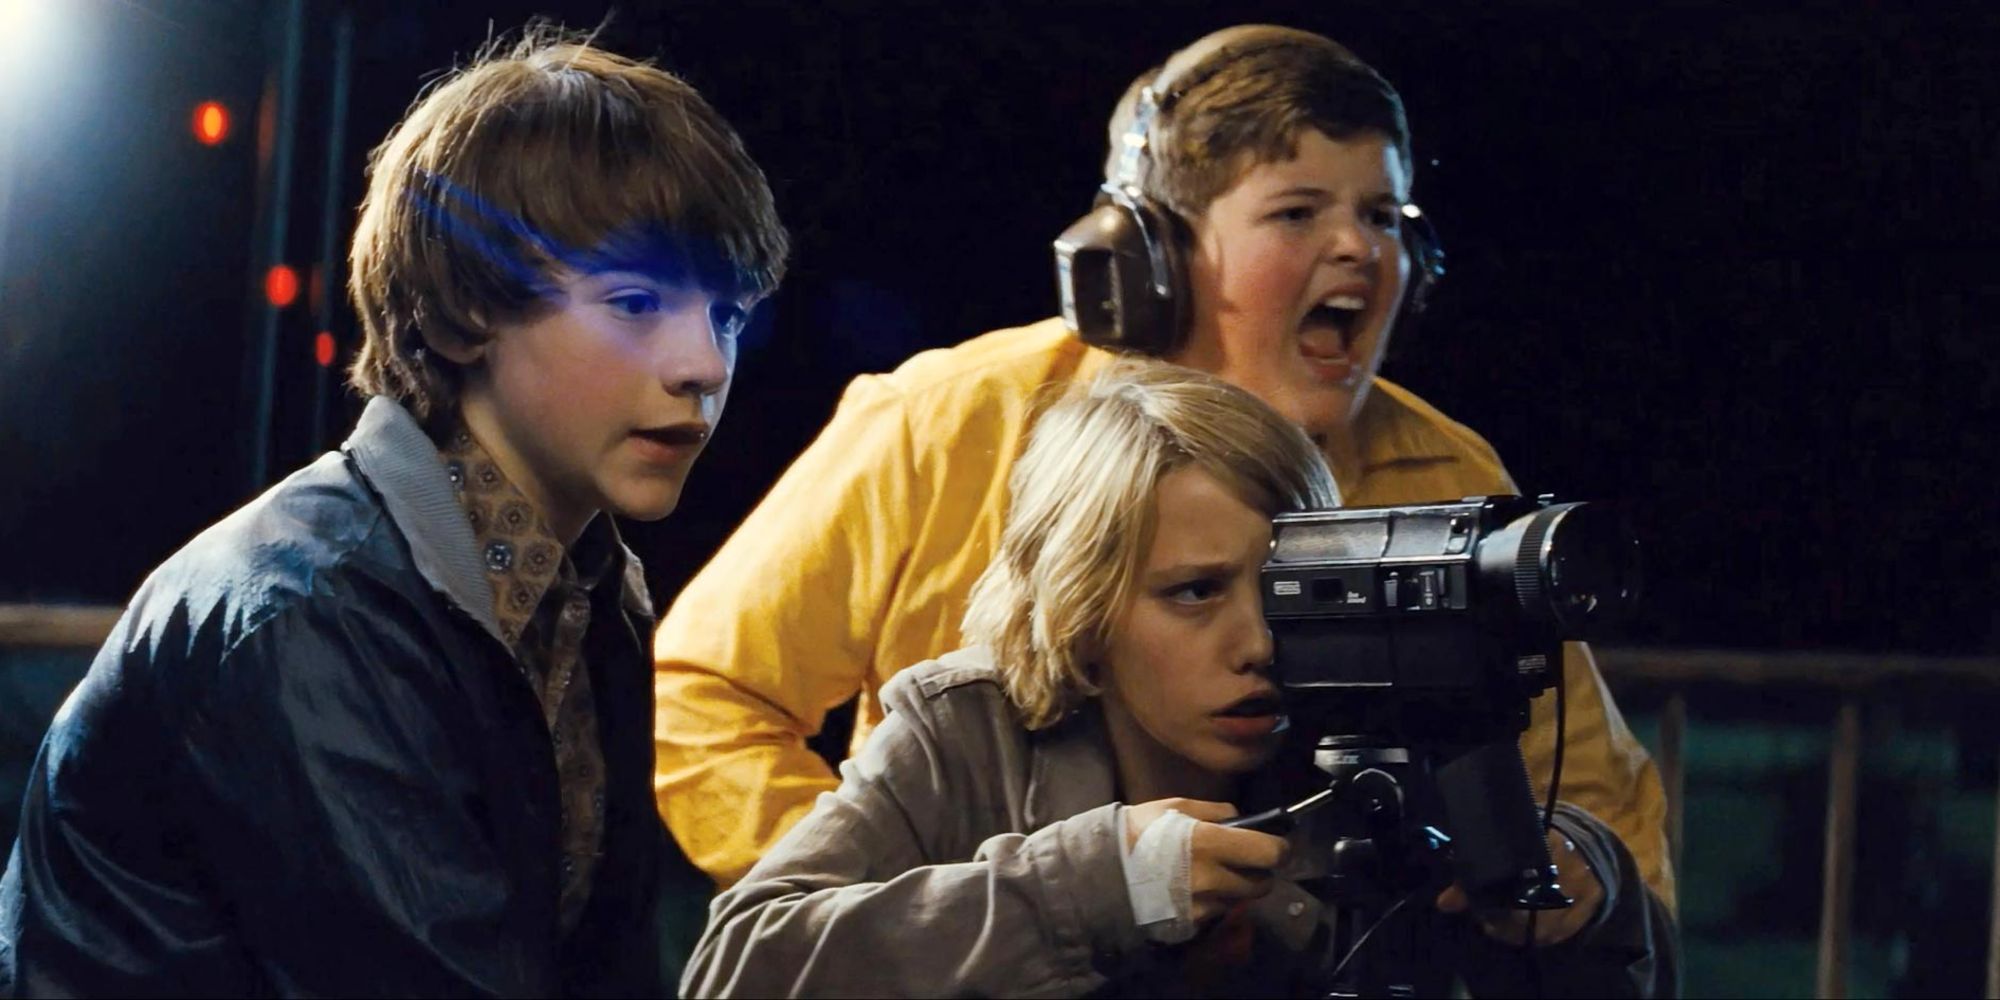 The kids of Super 8 shoot a movie